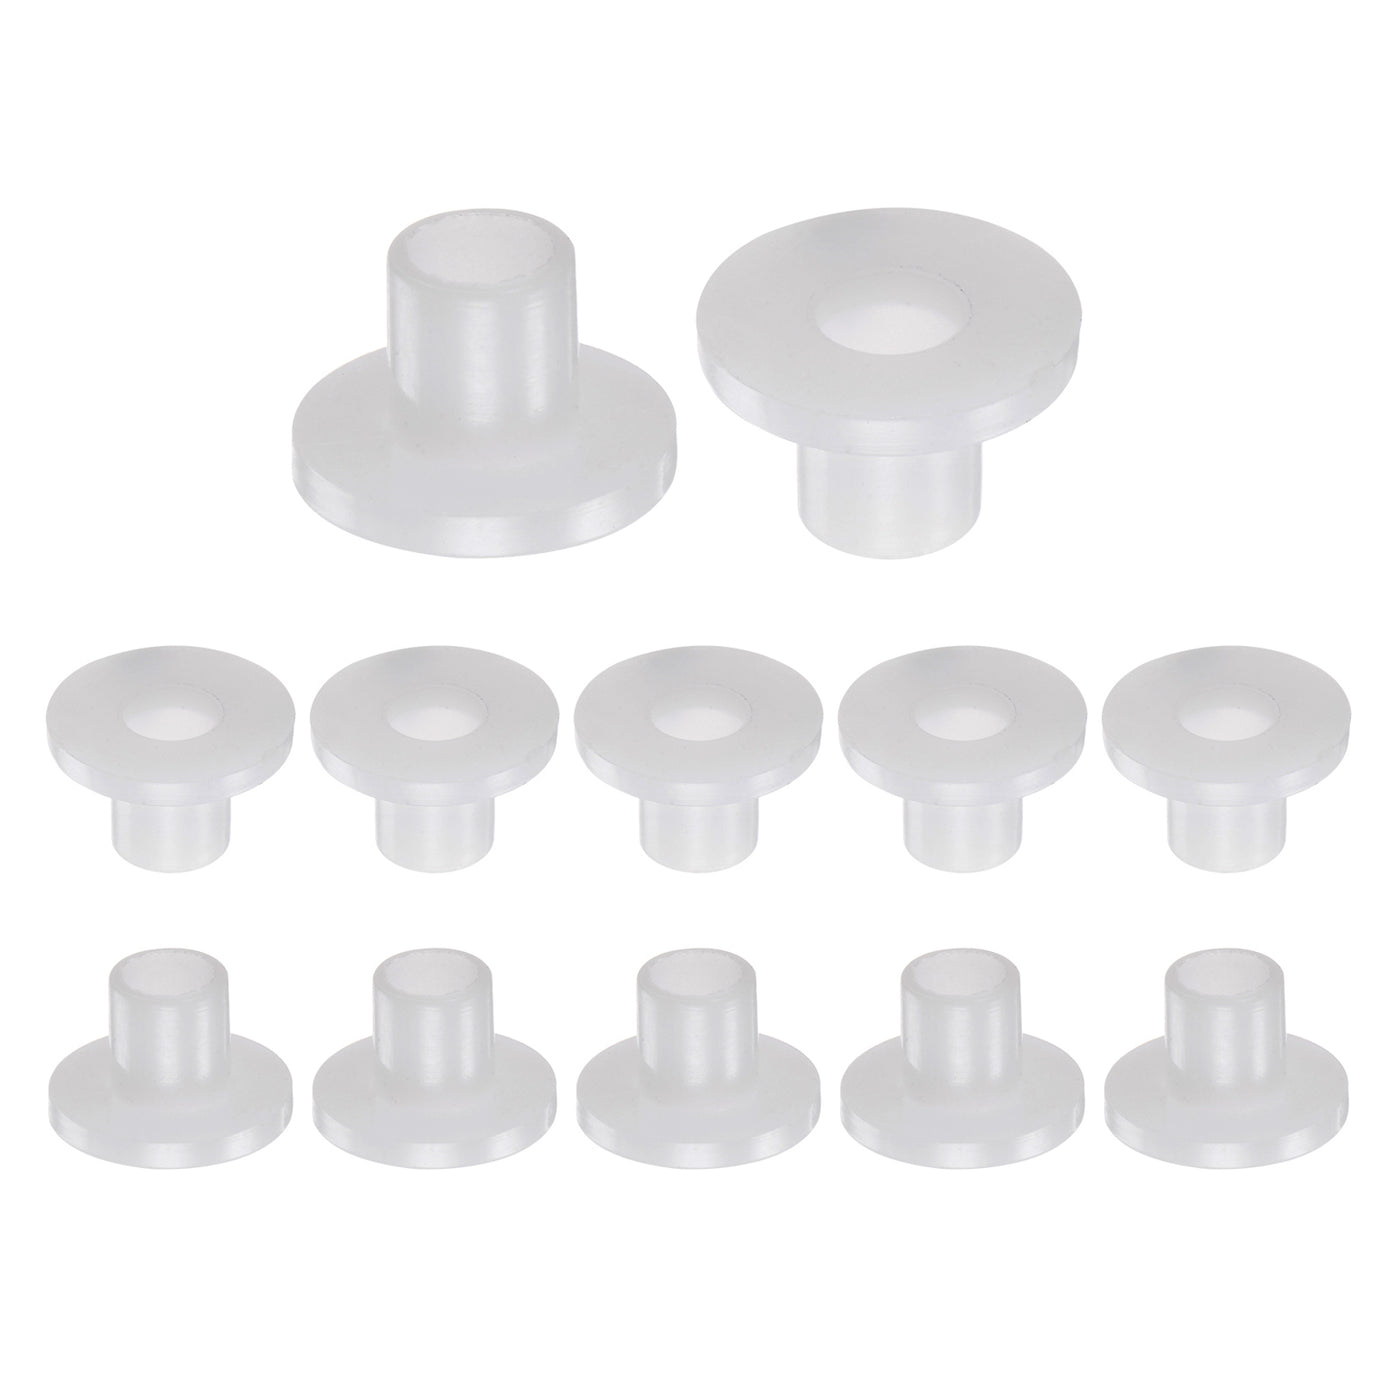 uxcell Uxcell 12pcs Flanged Sleeve Bearings 6mm ID 8mm OD 10mm Length Nylon Bushings, White